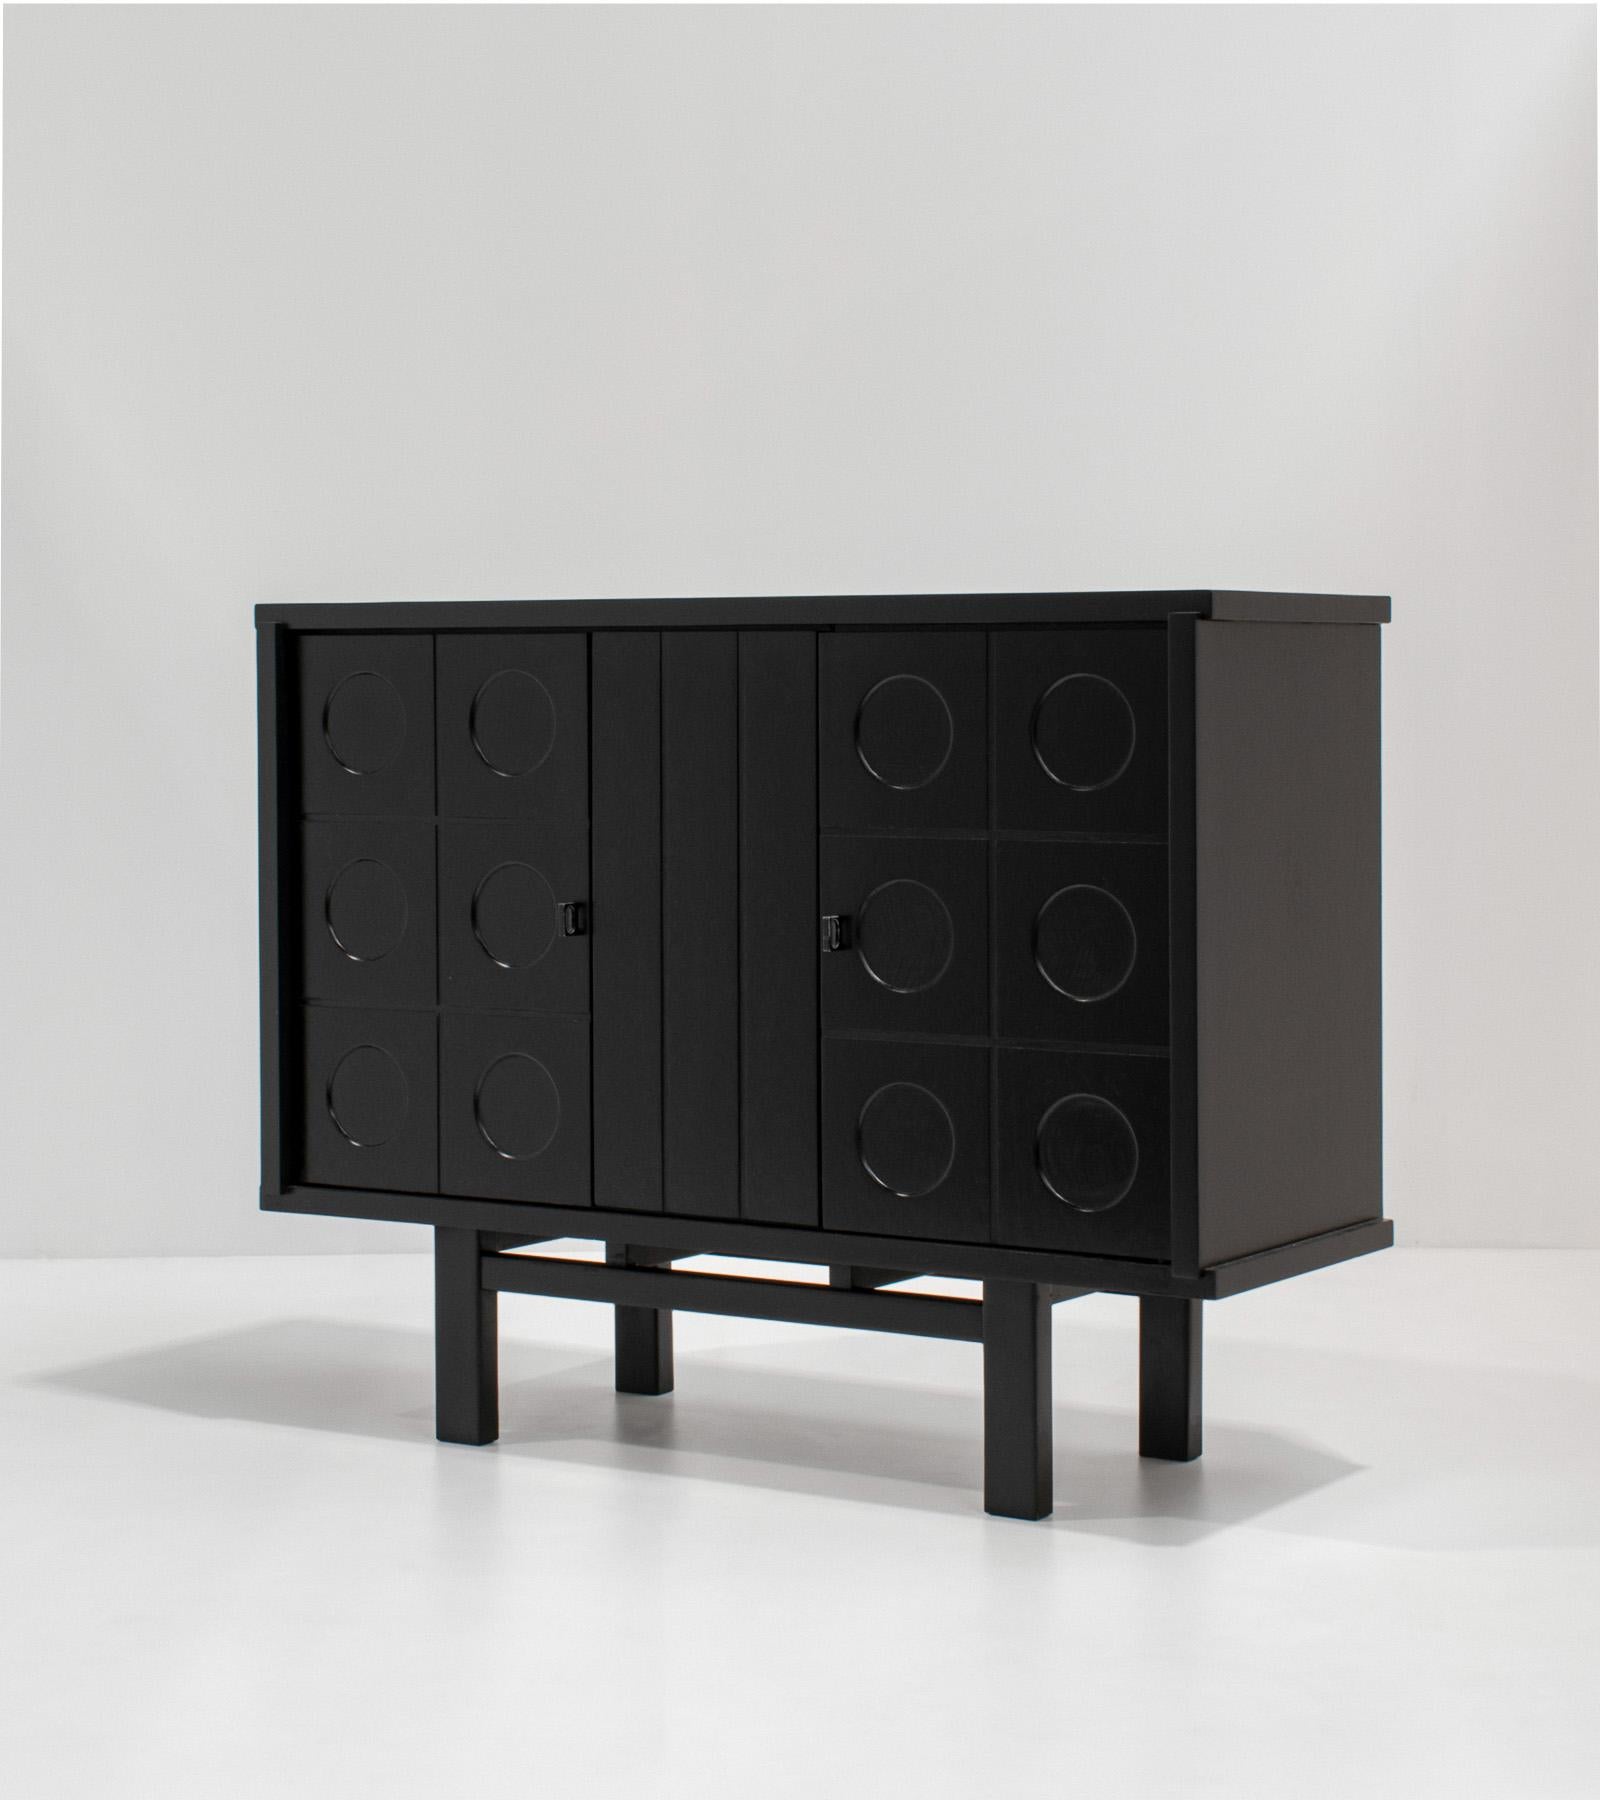 Stunning brutalist bar cabinet in black lacquered oak, Belgium 1970s

The cabinet features two graphic patterned doors and provides plenty of storage which makes it both very functional and decorative. The perfect fit for any contemporary space.